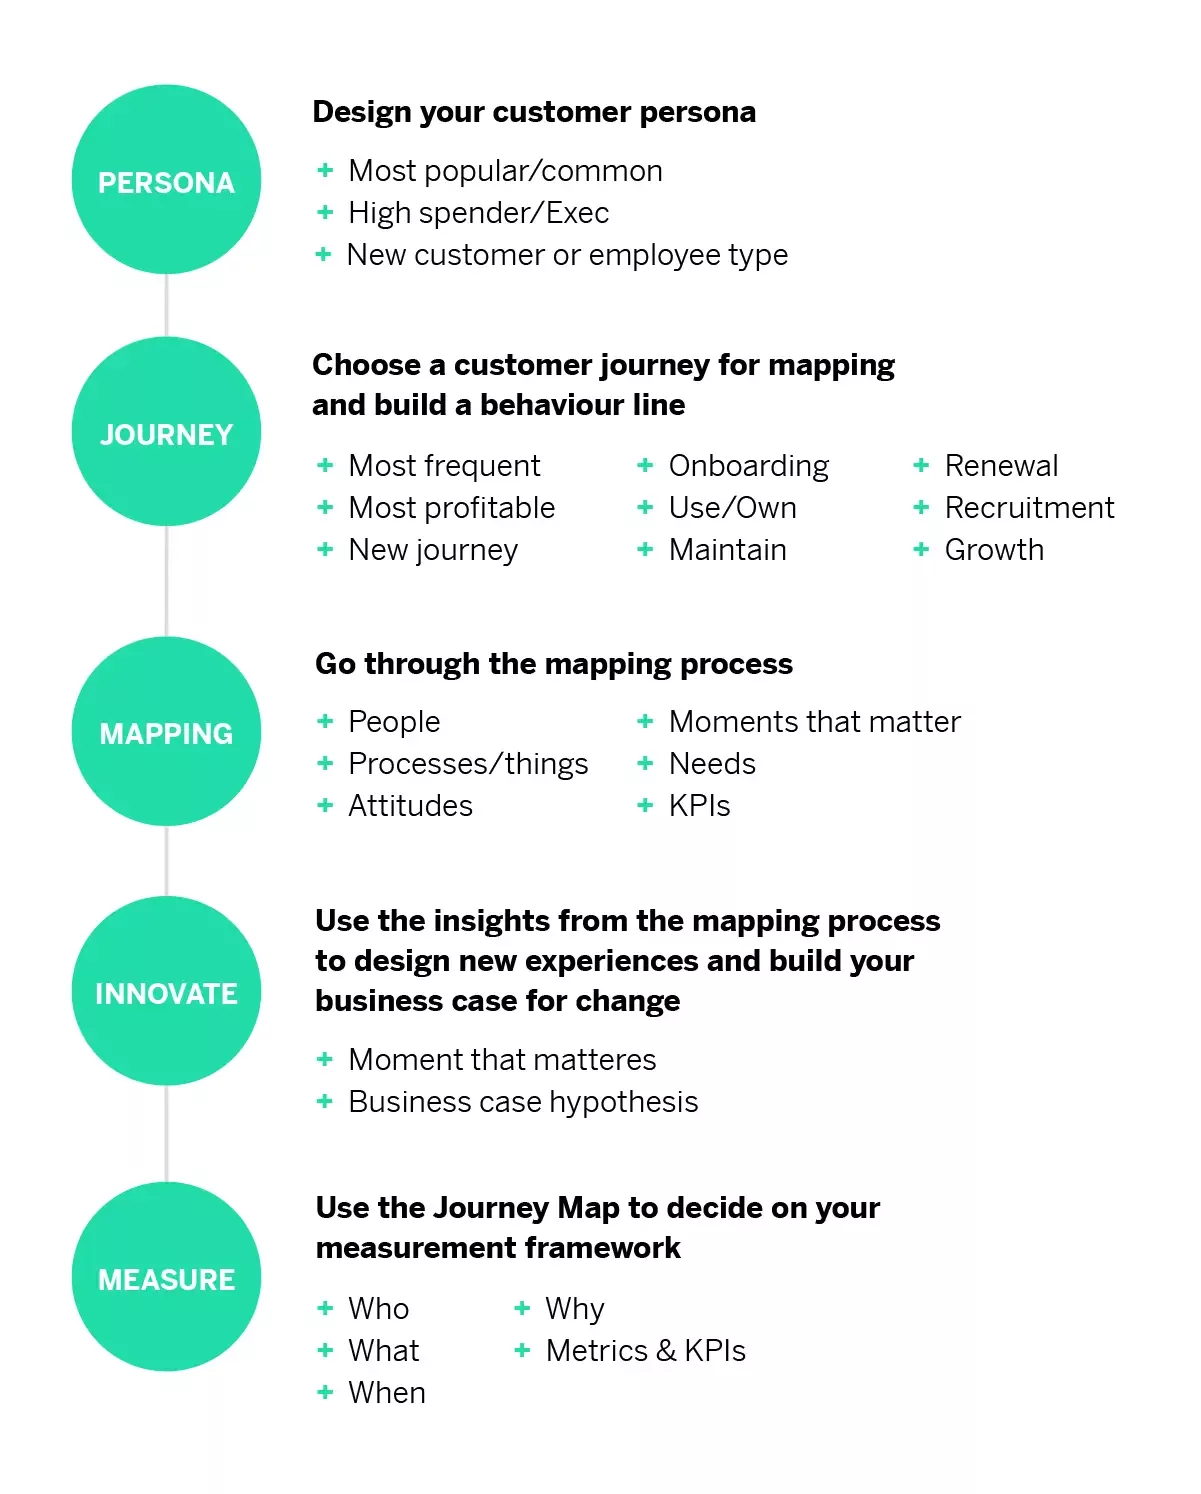 Qualtrics framework for creating journey maps. Its broken down into steps: Persona: Design your customer Persona, Journey: Choose a customer journey for mapping and build a behavior line, Mapping: Go through the mapping process, Innovate: Use the insights from the mapping process to design and build your business case for change and Measure: Use the journey map to decide on your measurement framework.